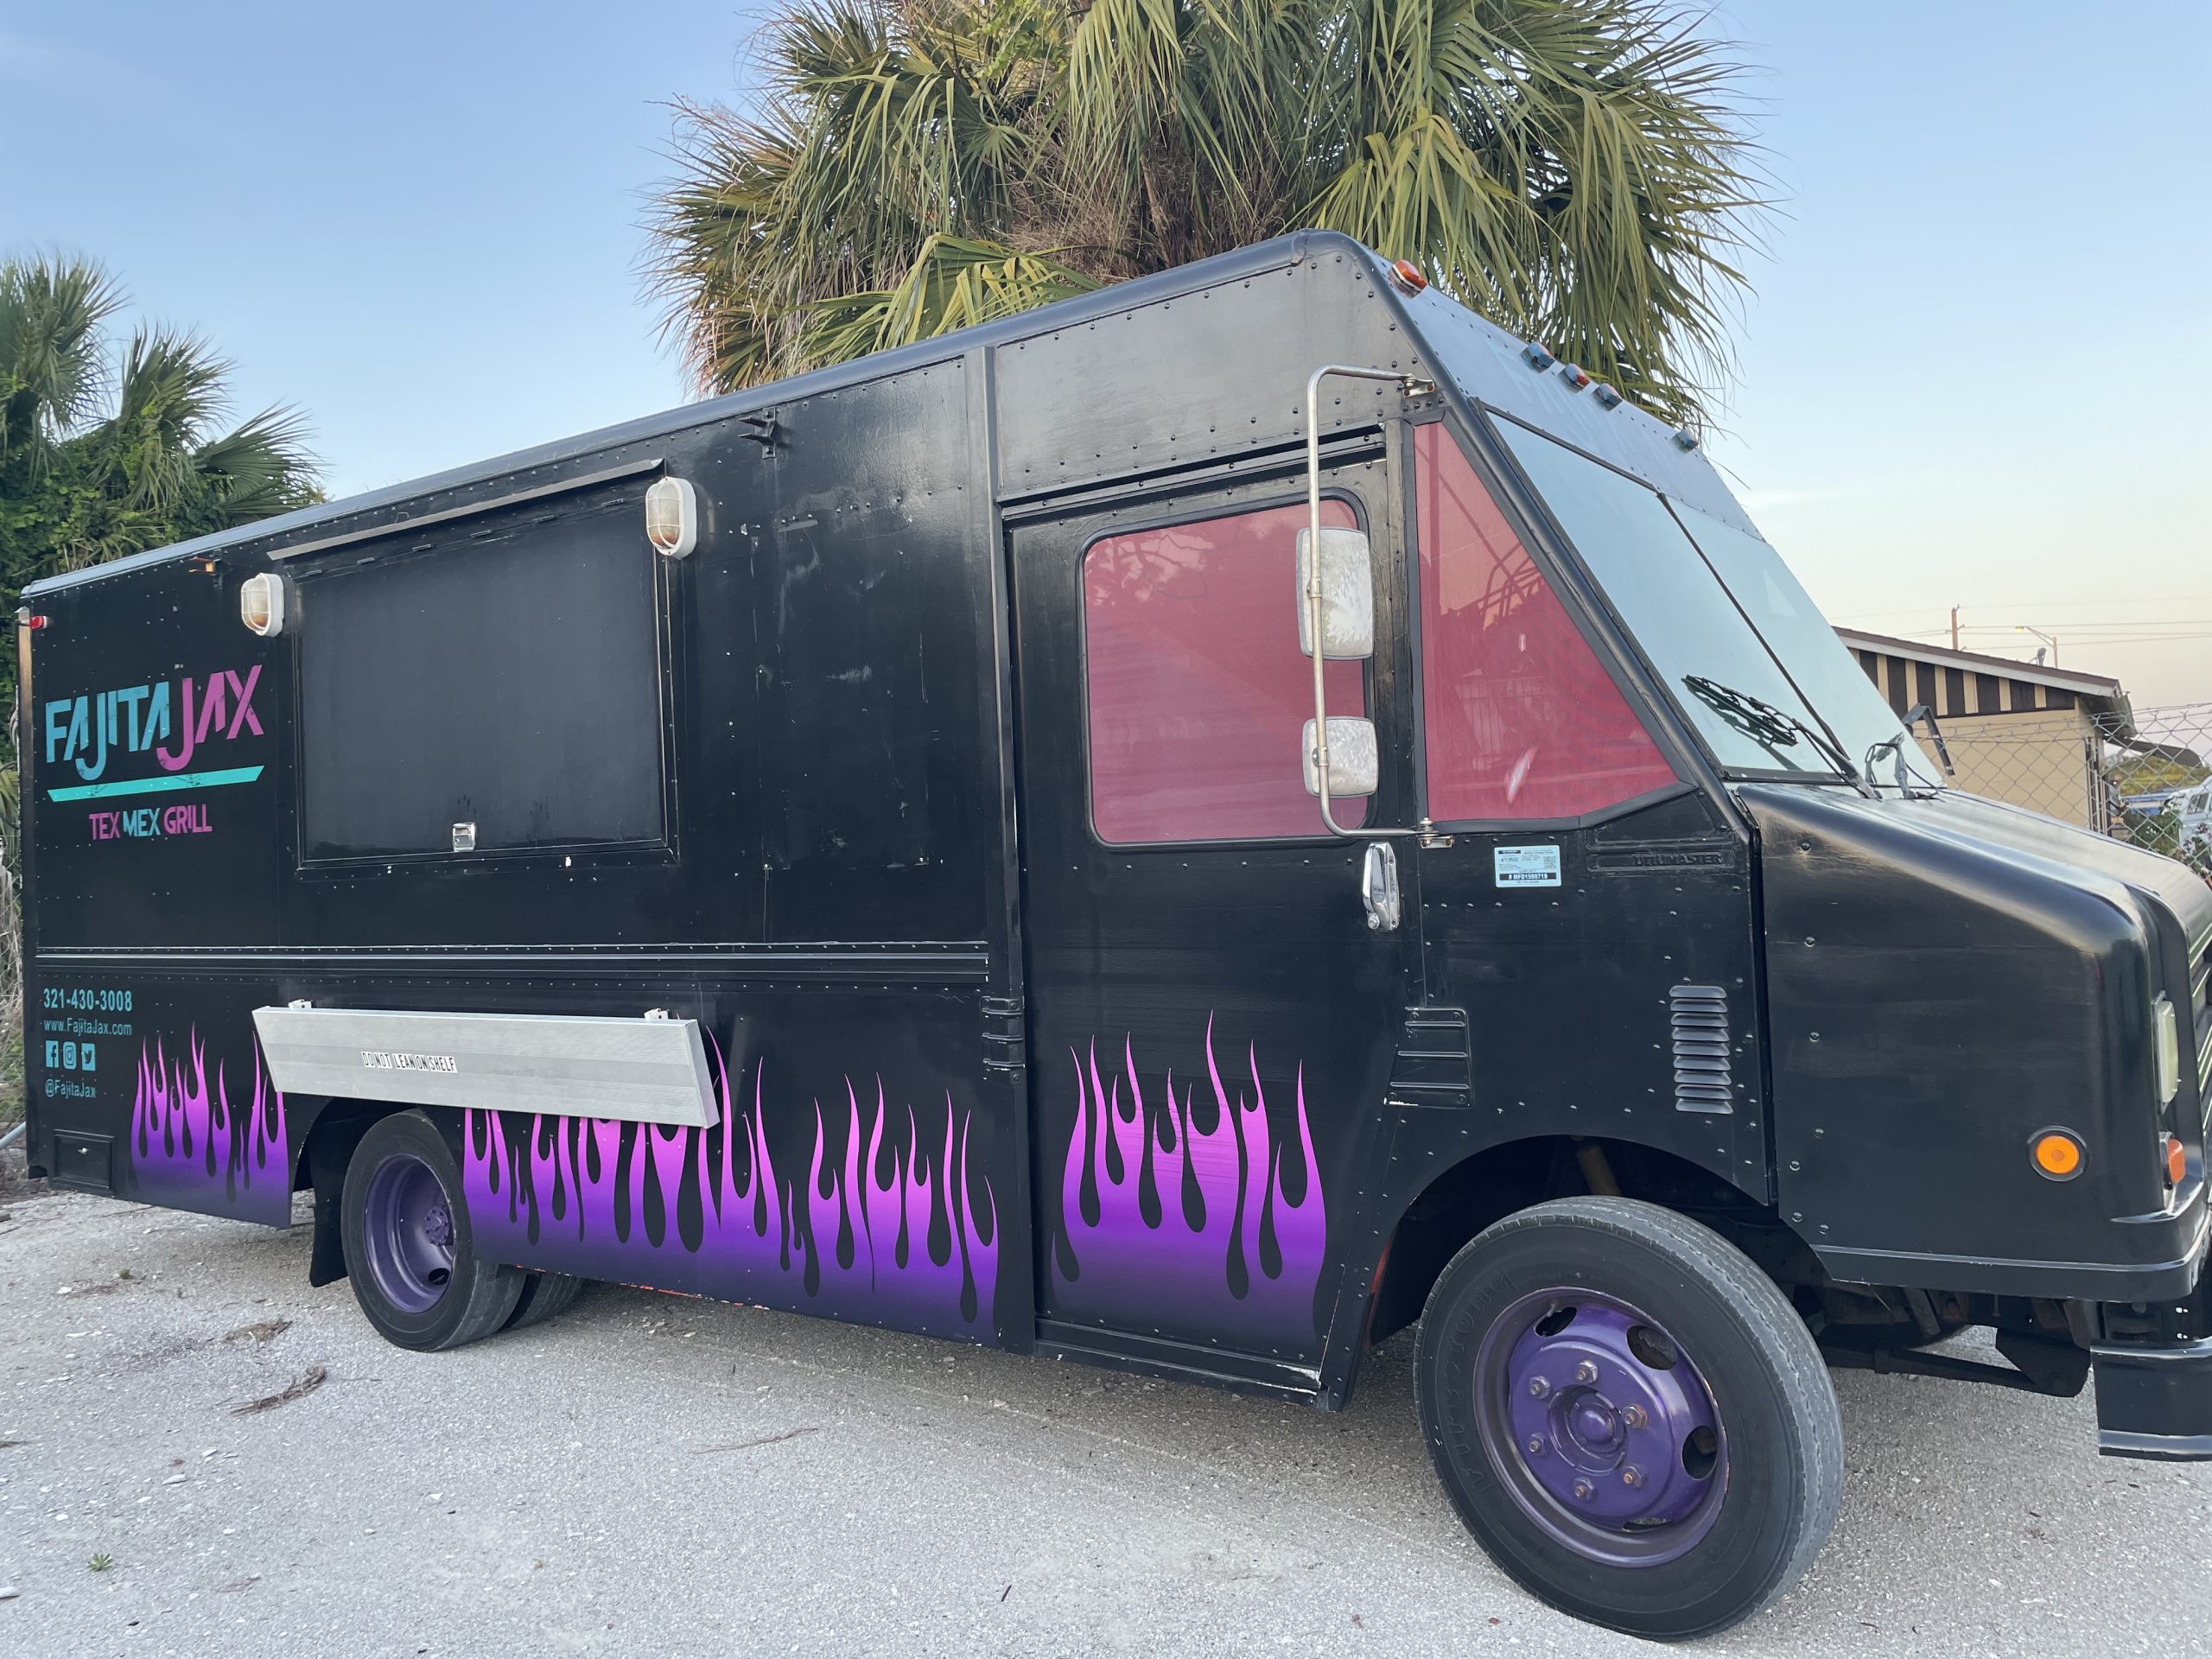 25' High Food Truck for Sale Melbourne, FL - Food Truck Empire